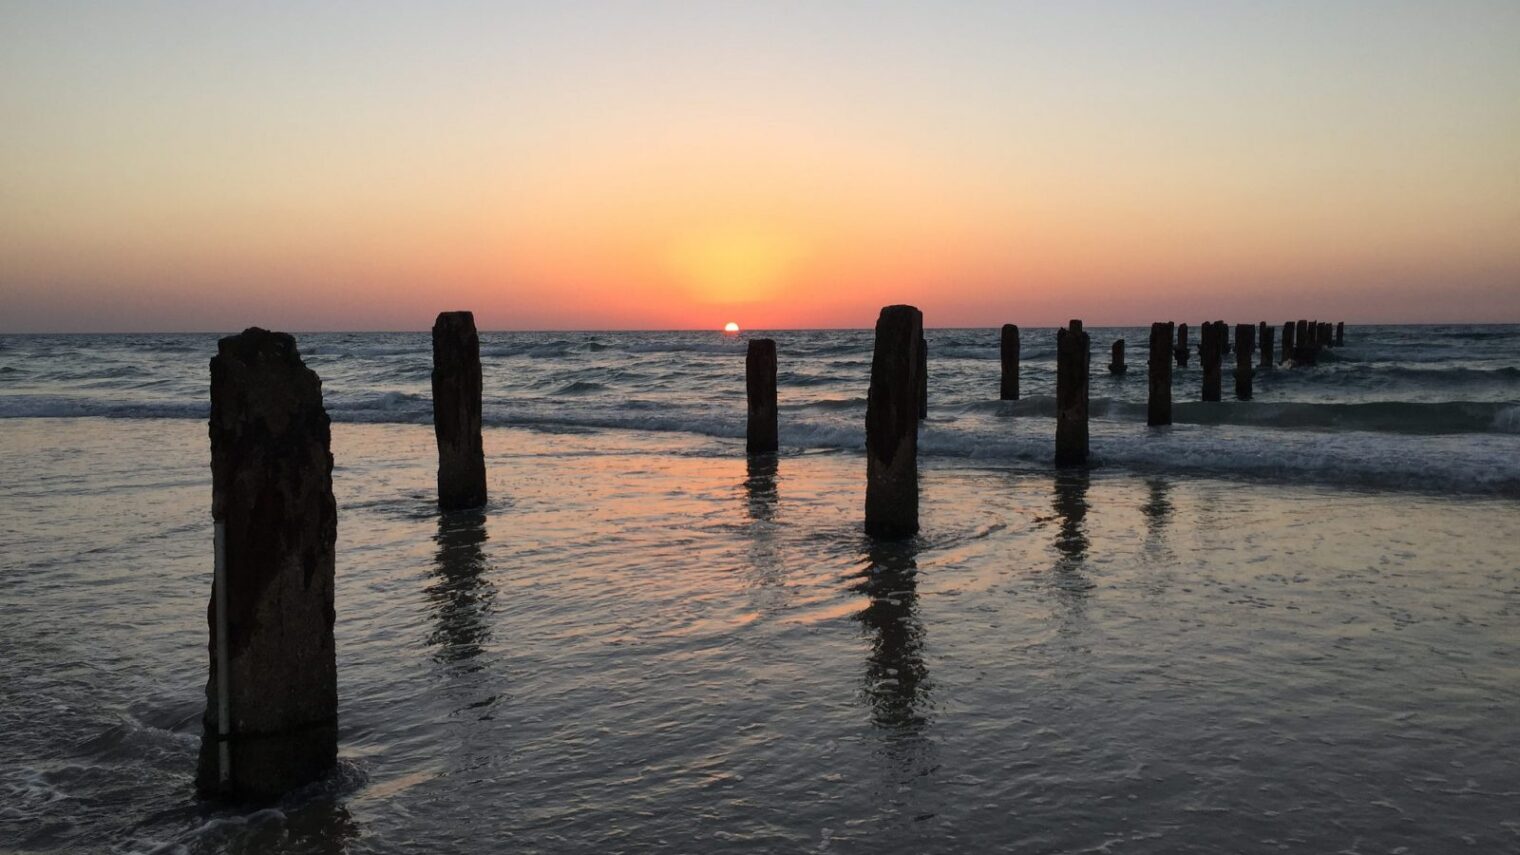 And sunsets that look like this. A sunset at Beit Yanai Beach. Photo by Nicky Blackburn